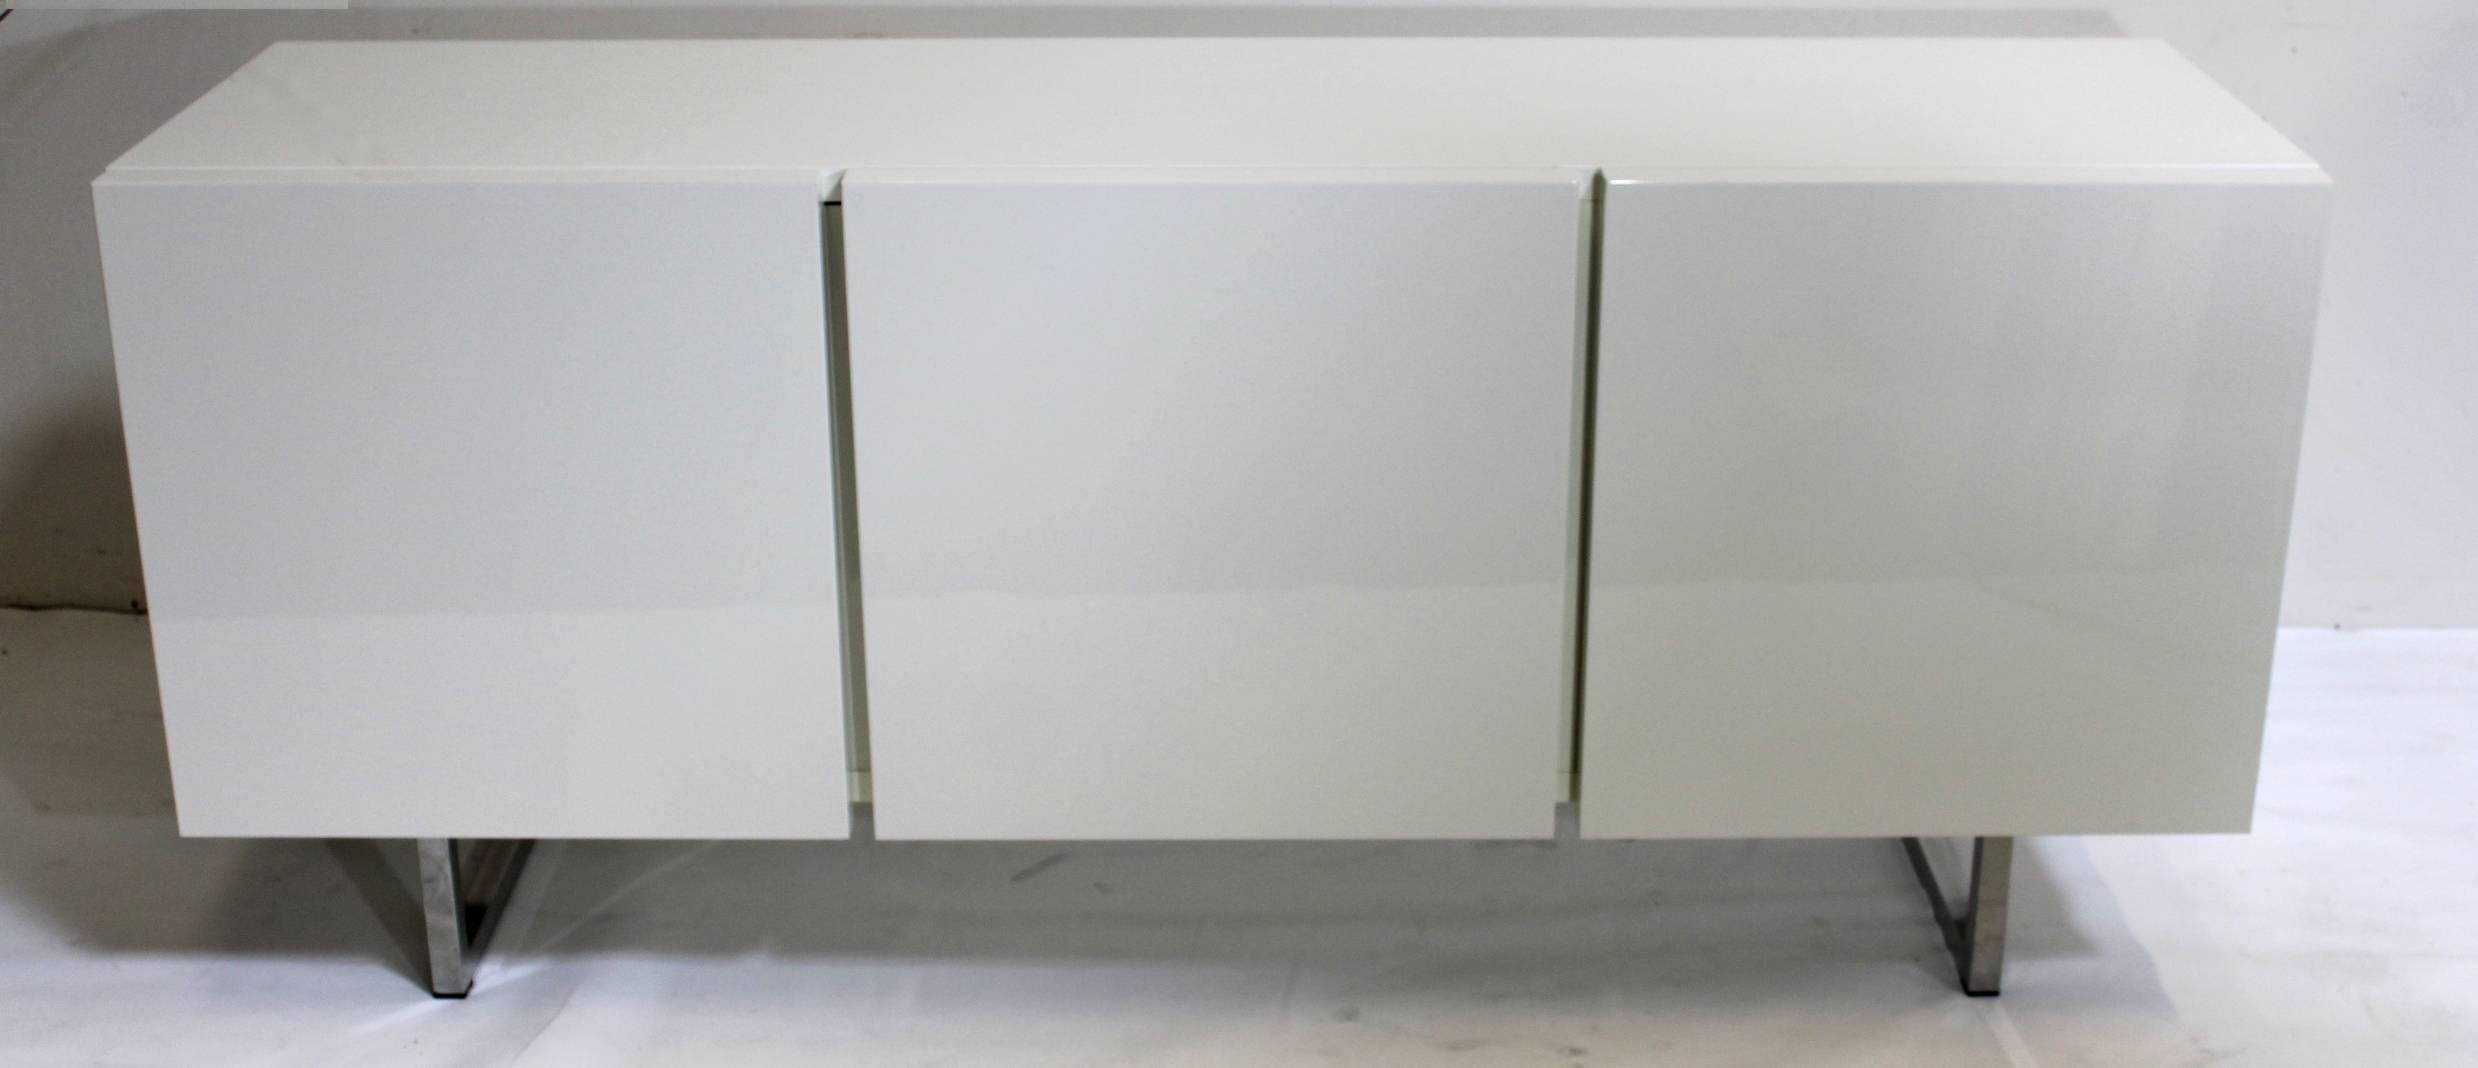 Contemporary Modern White Lacquered Credenza Buffet Dresser by Calligaris